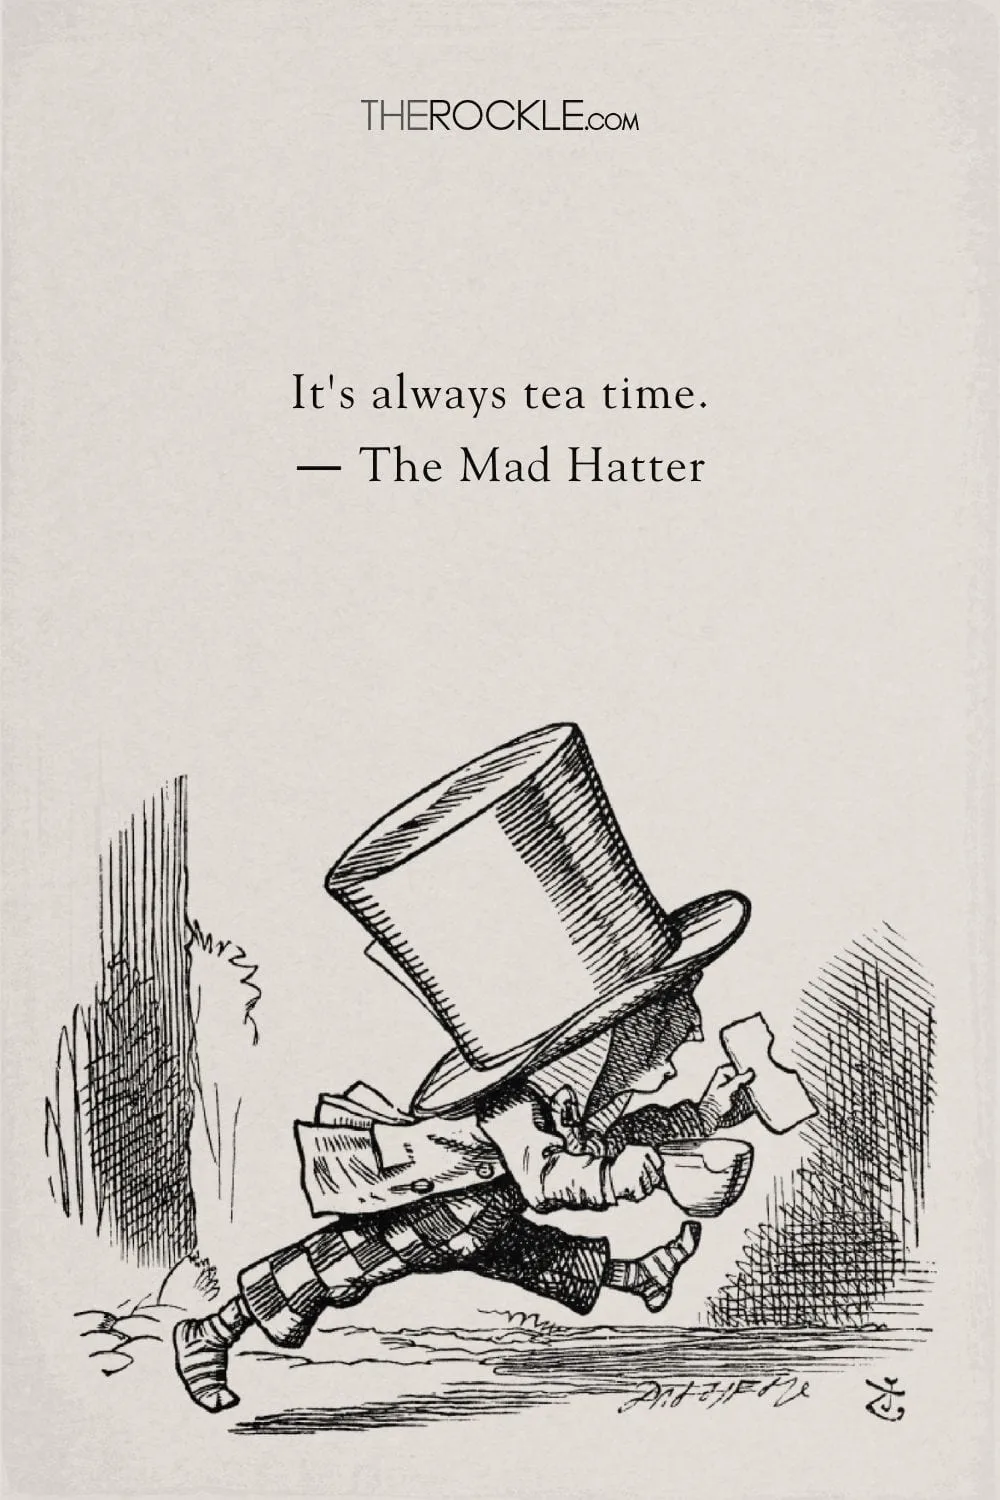 The Mad Hatter quote about tea